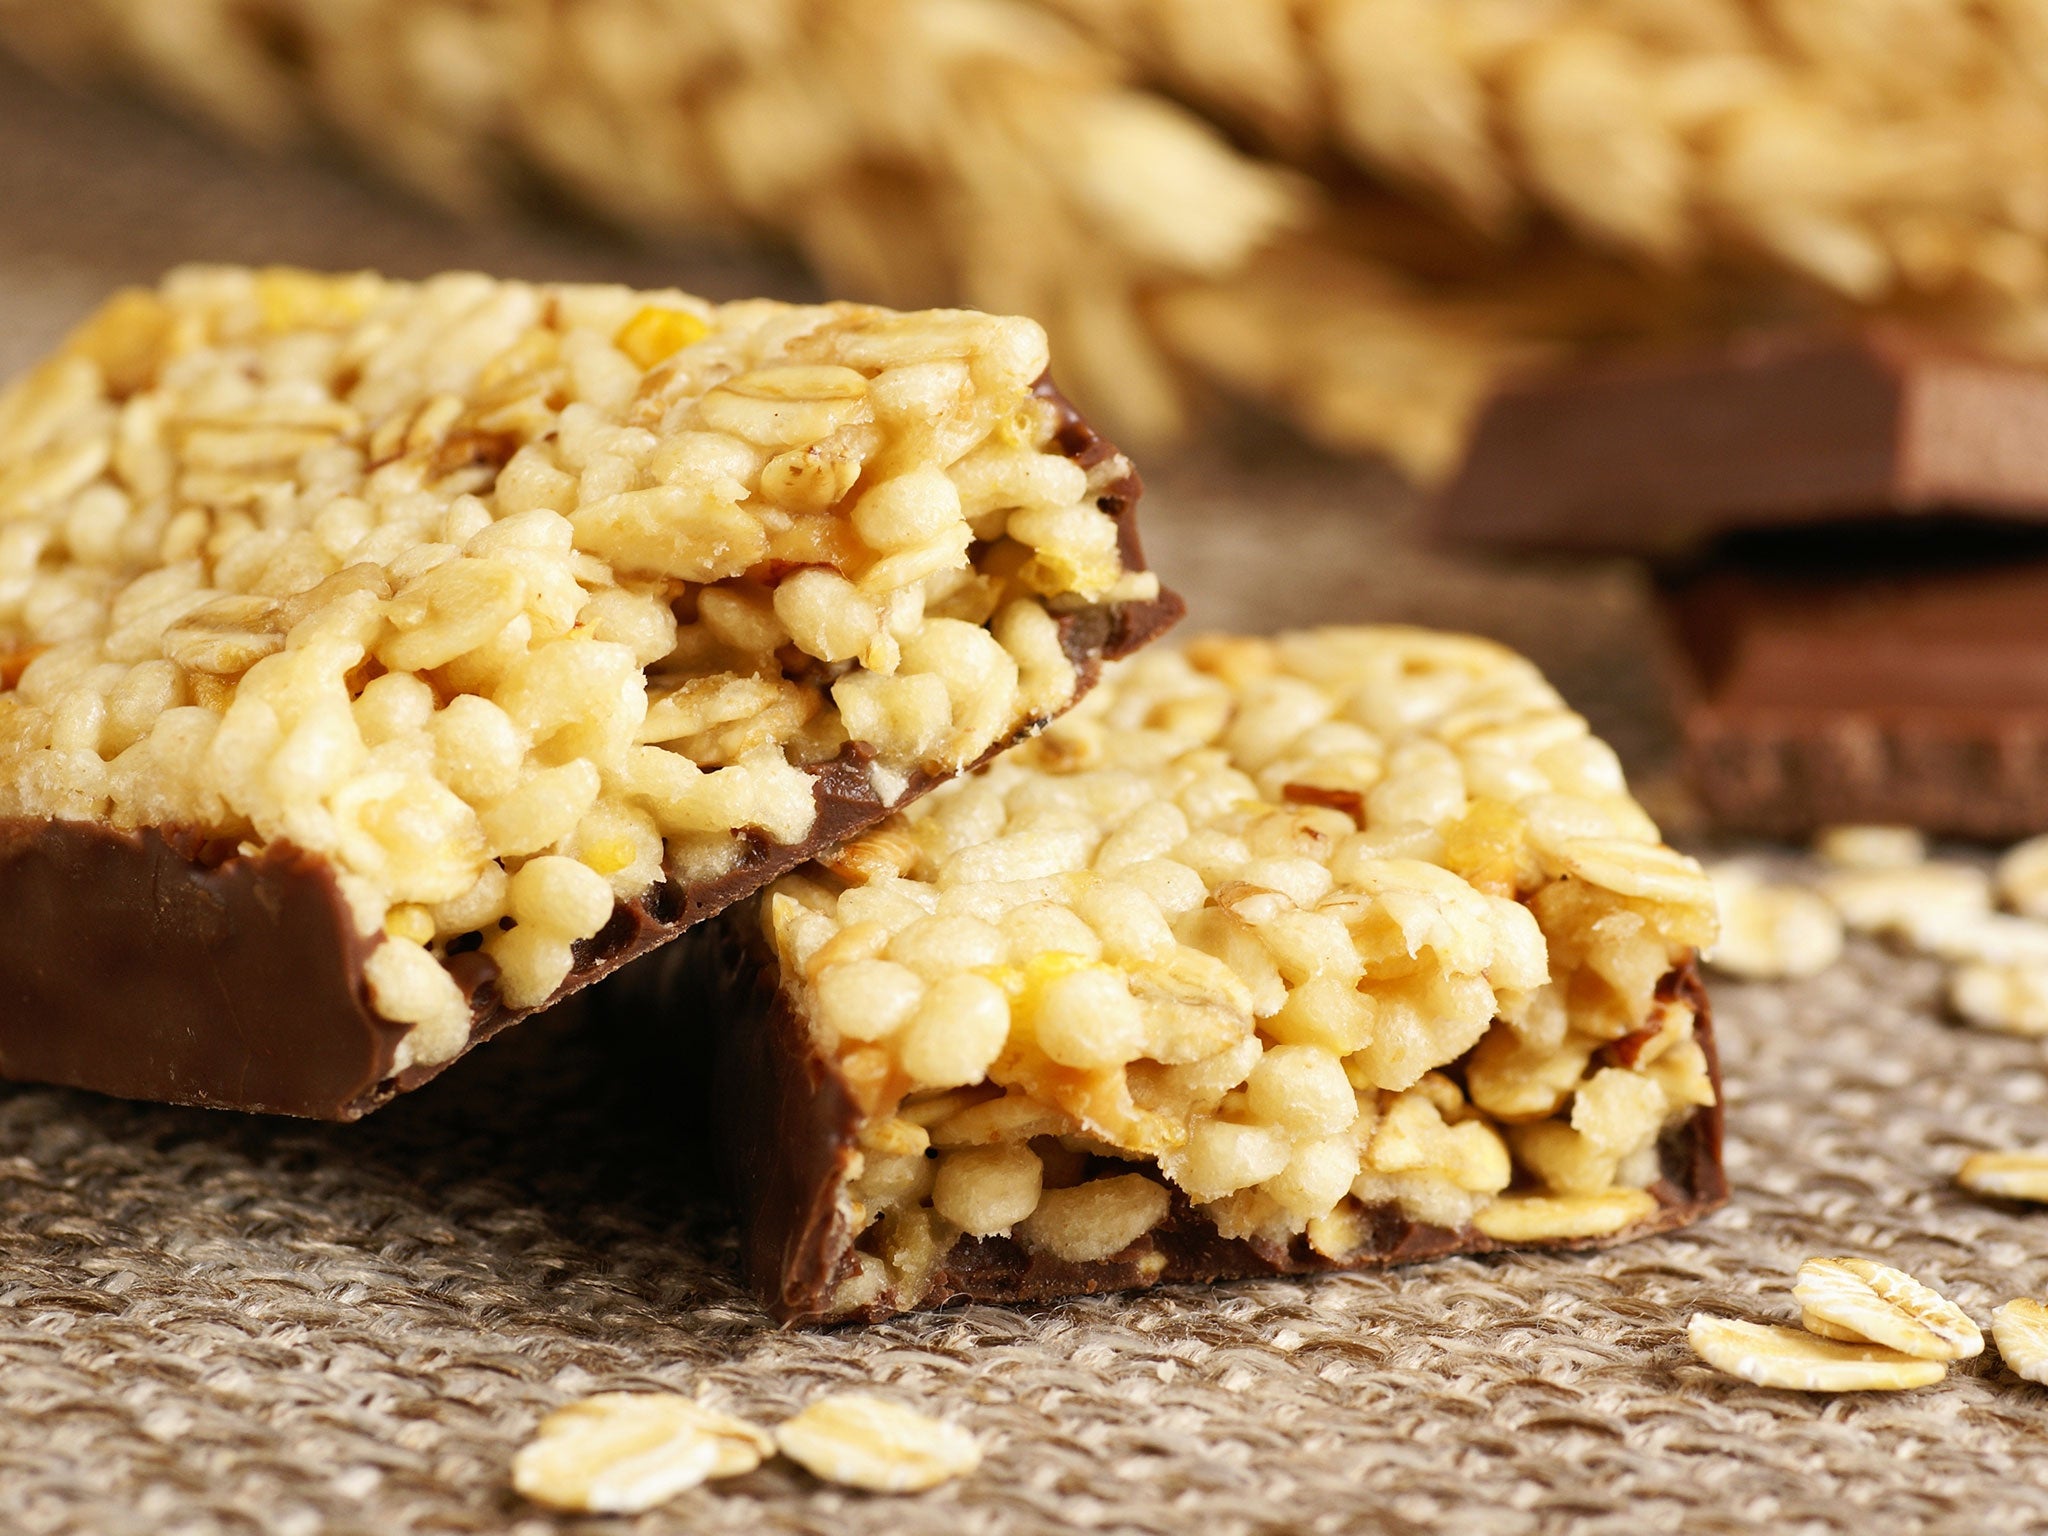 Cereal bars are often sold as a healthier option to other snacks